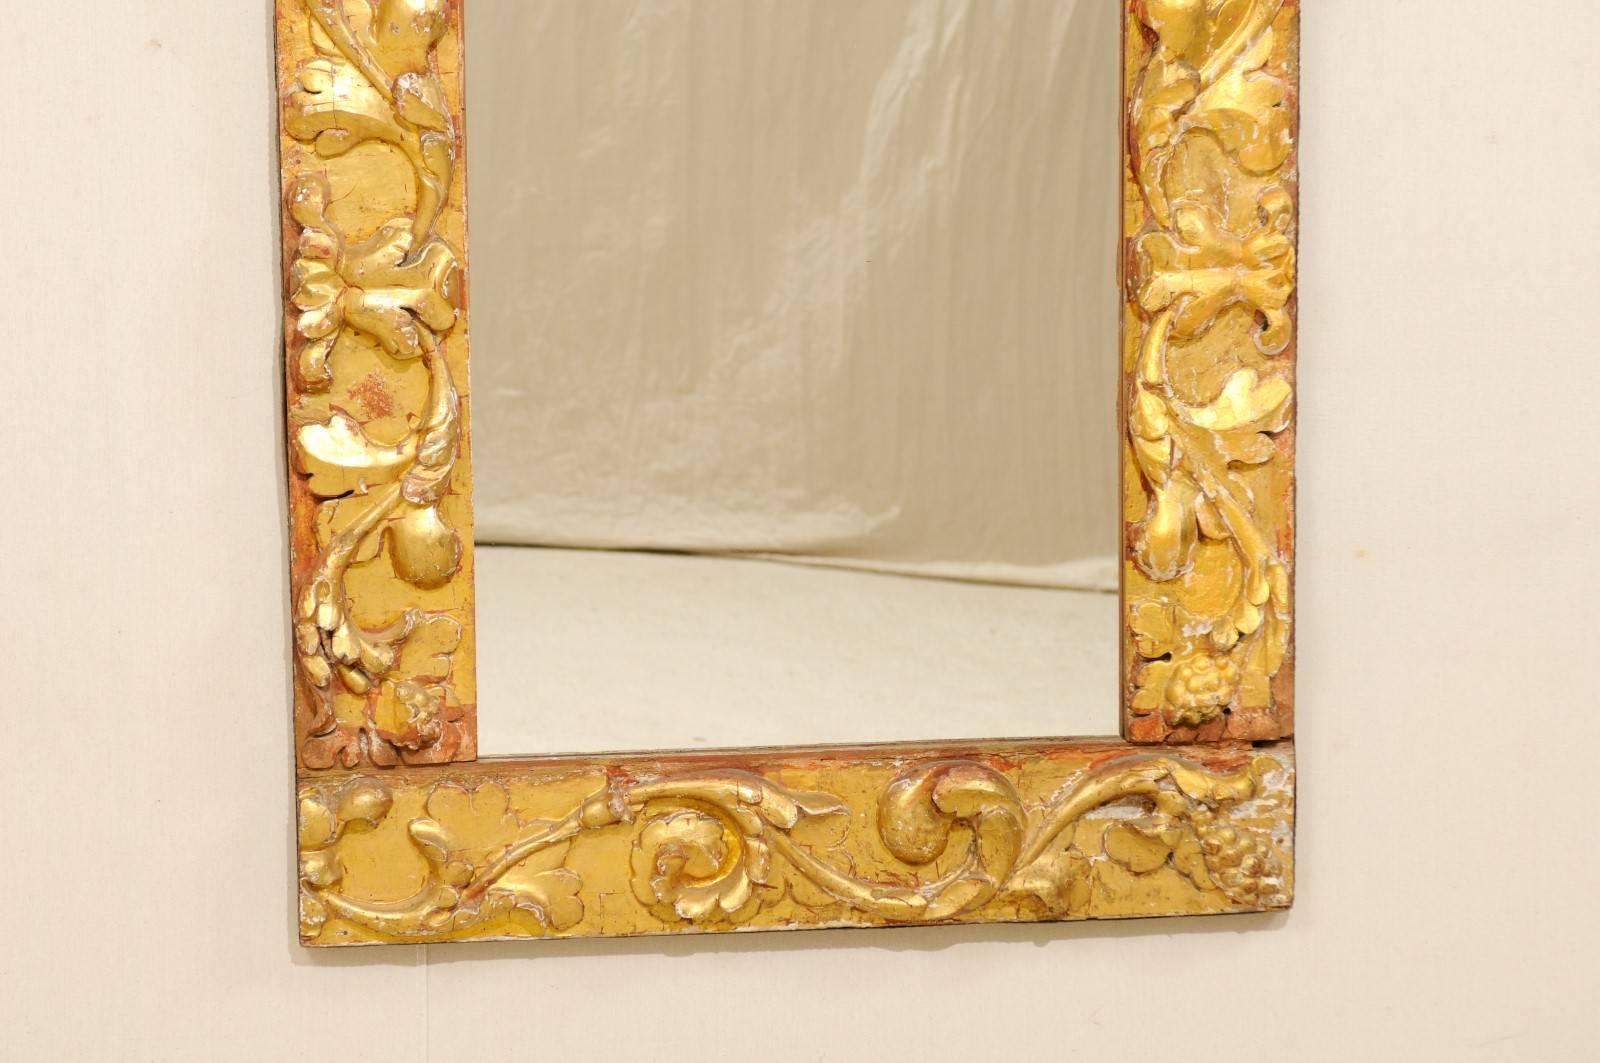 Wood Exquisite Italian Giltwood Carved Mirror of 19th Century Italian Fragments For Sale